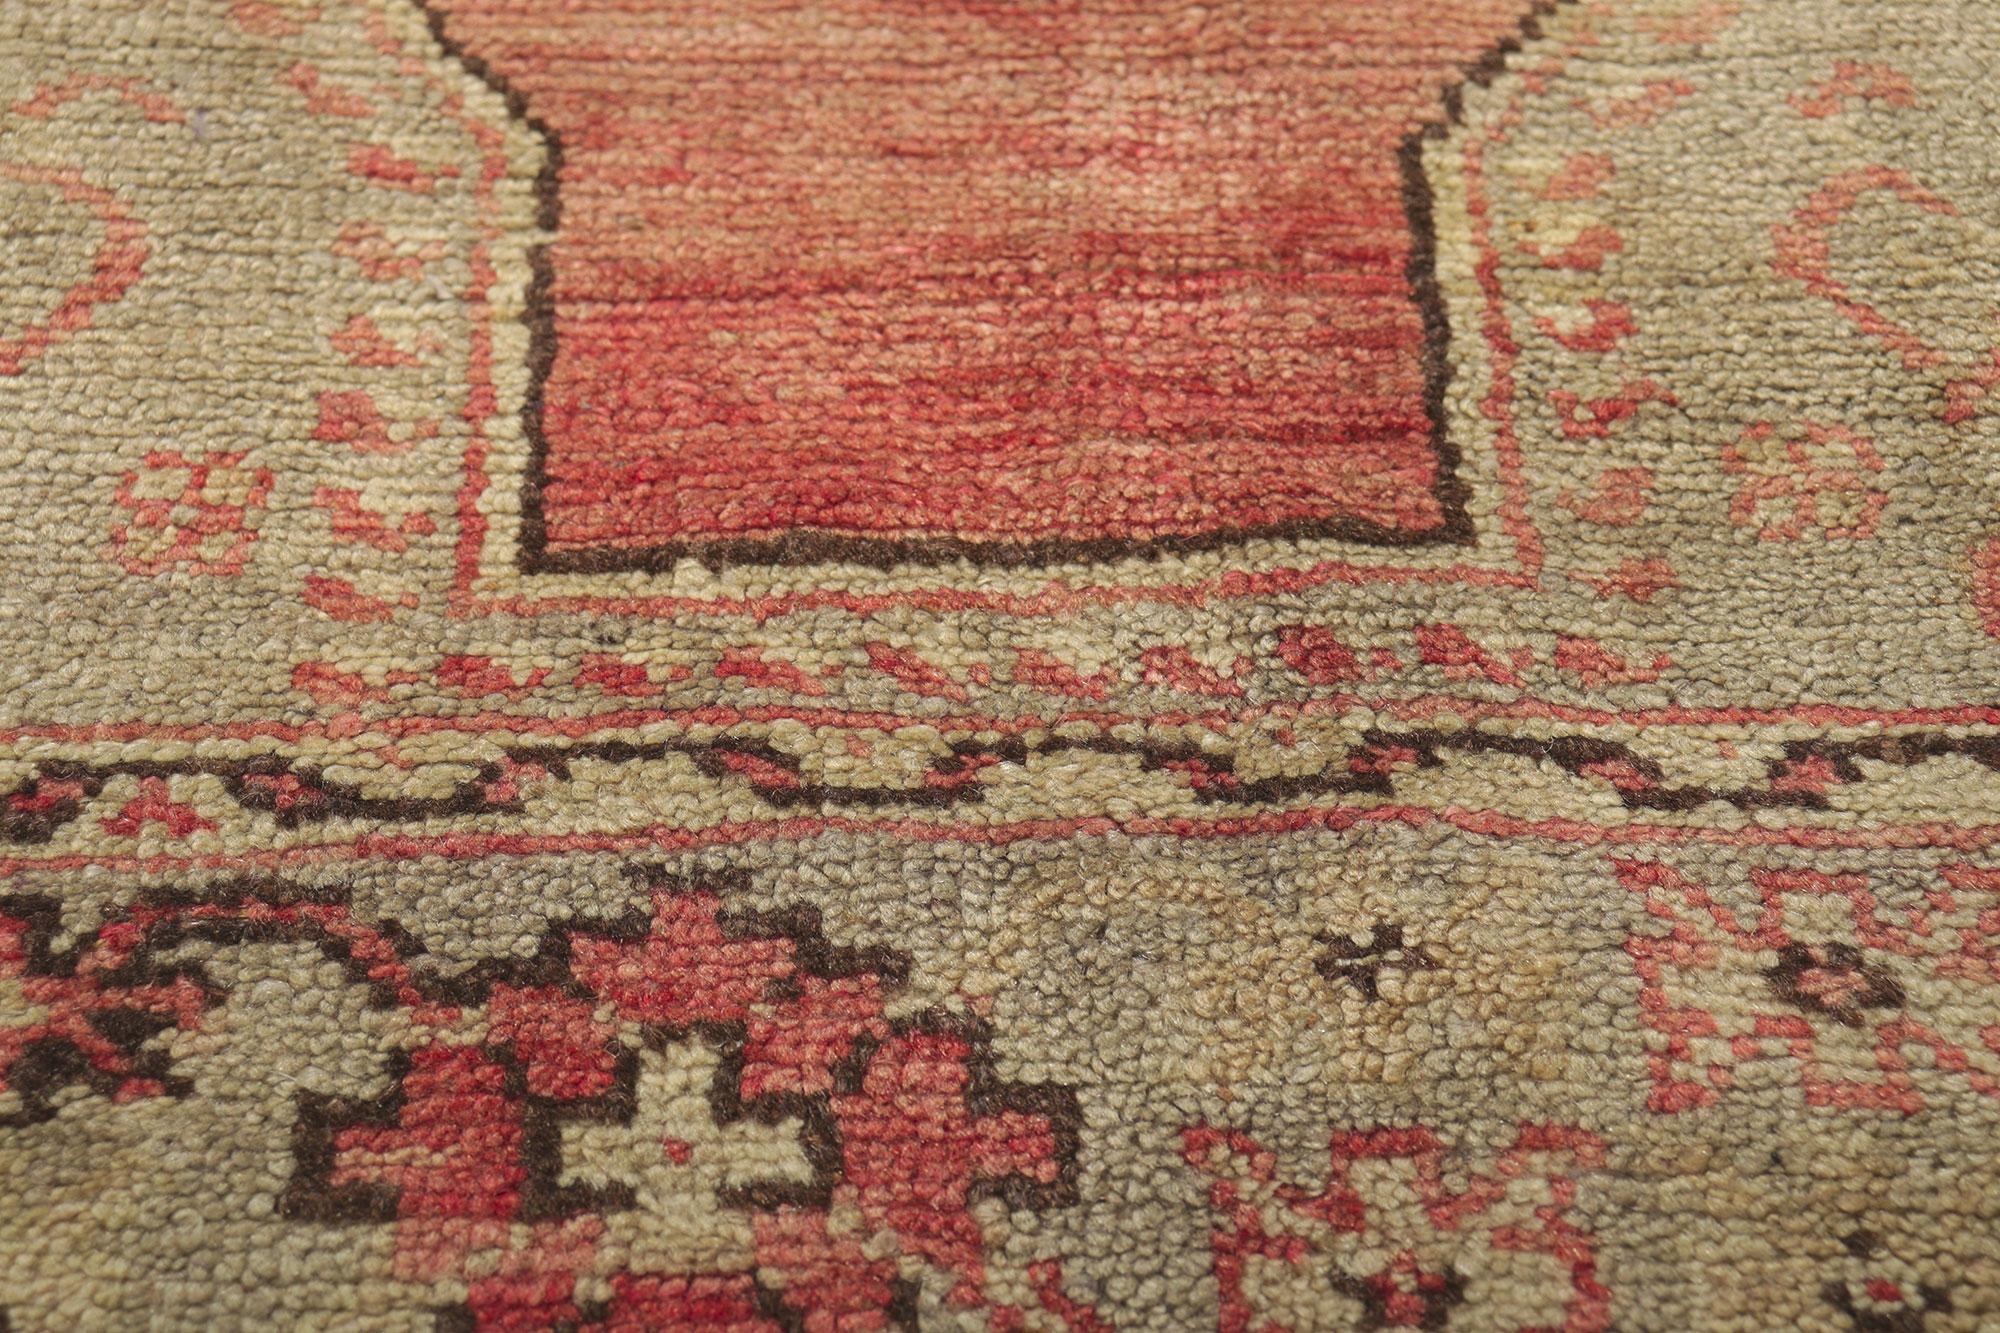 Vintage Turkish Oushak Rug with Rustic Earth-Tone Colors In Good Condition For Sale In Dallas, TX